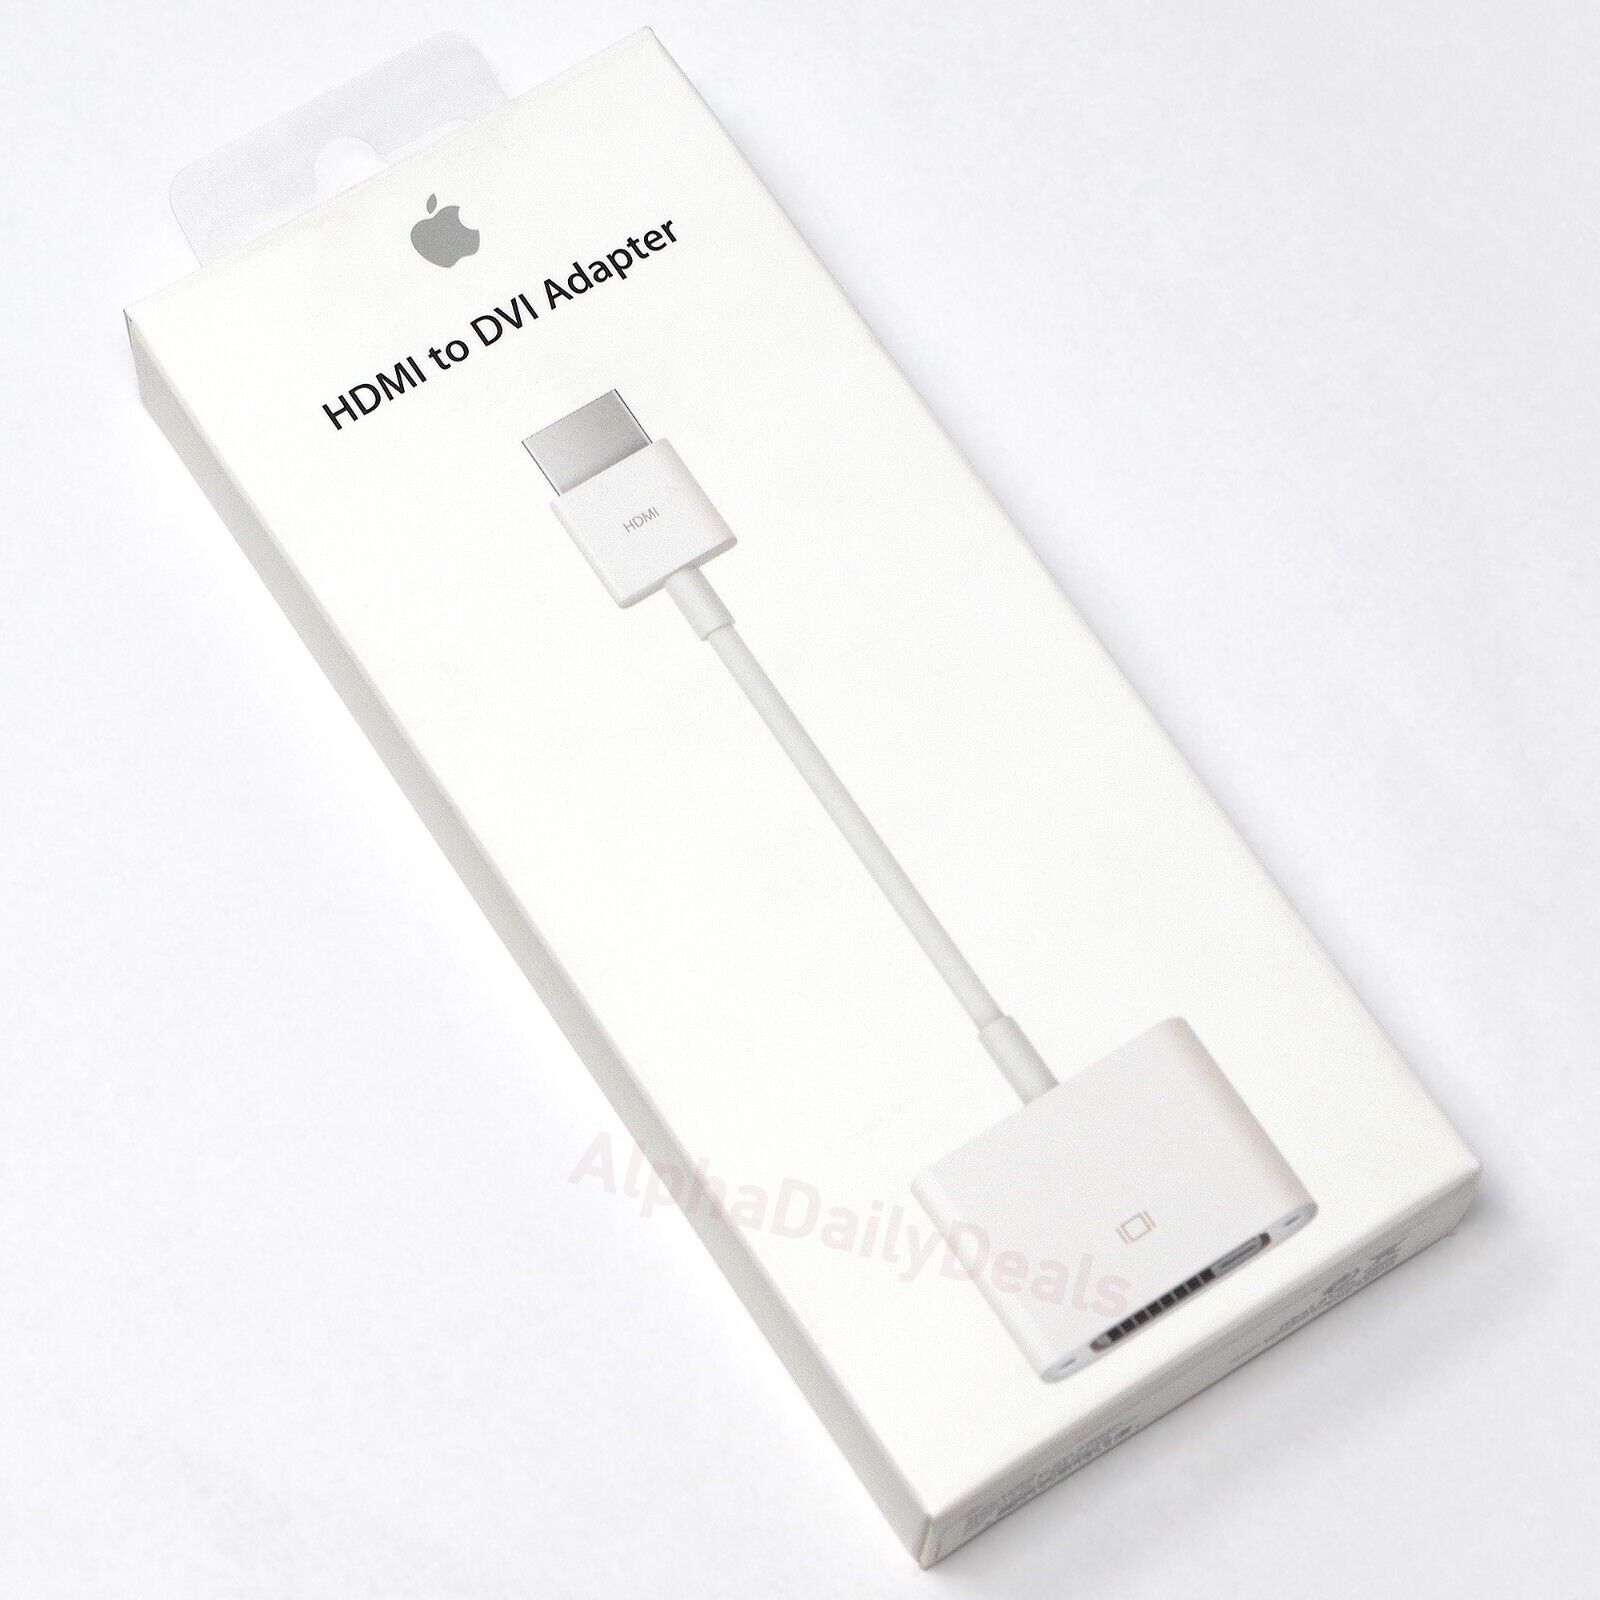 NEW Genuine Apple HDMI to DVI Video Adapter